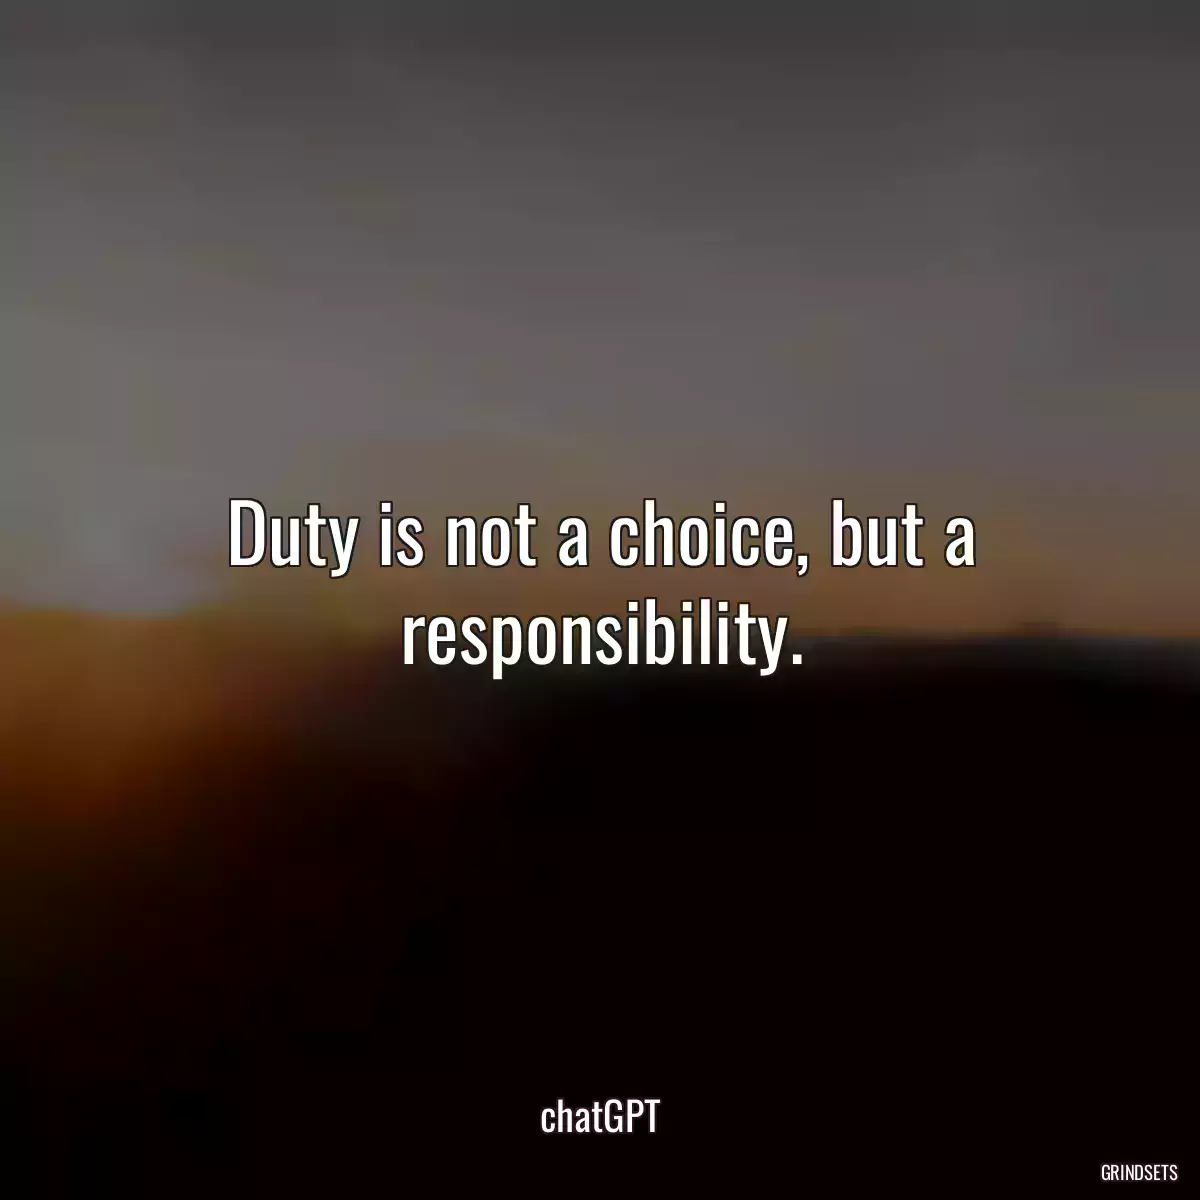 Duty is not a choice, but a responsibility.